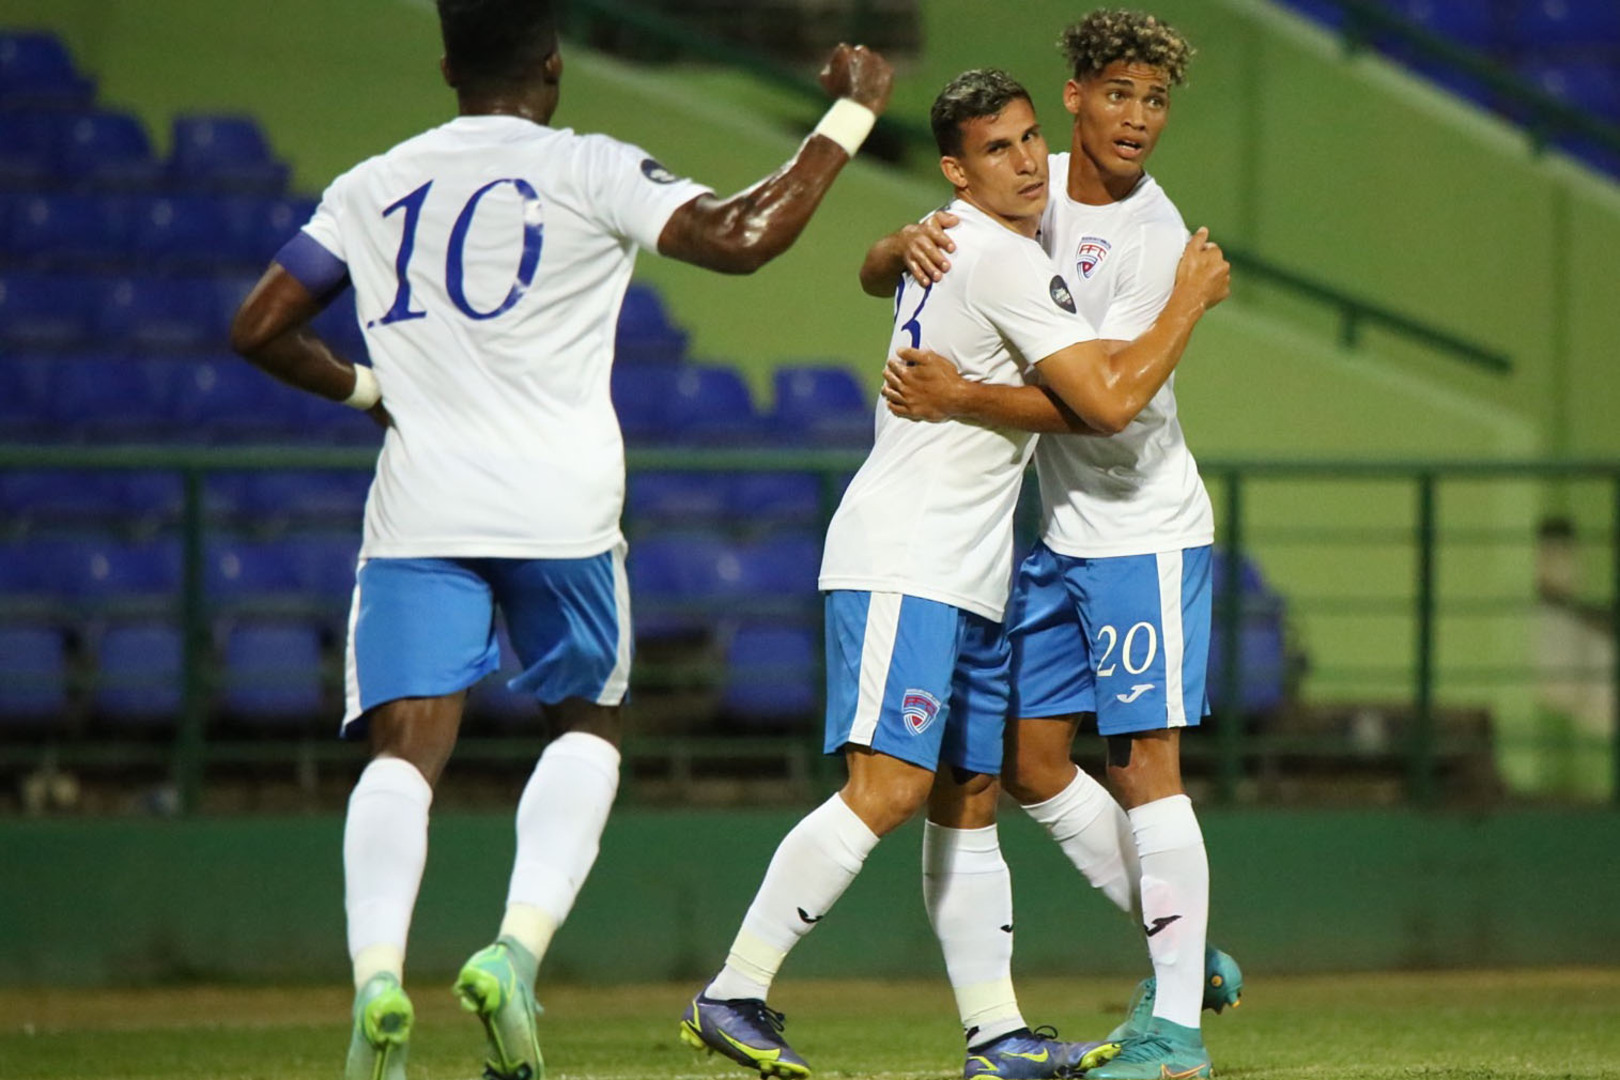 Cuban soccer player Luis Paradela plays for U.S. club without